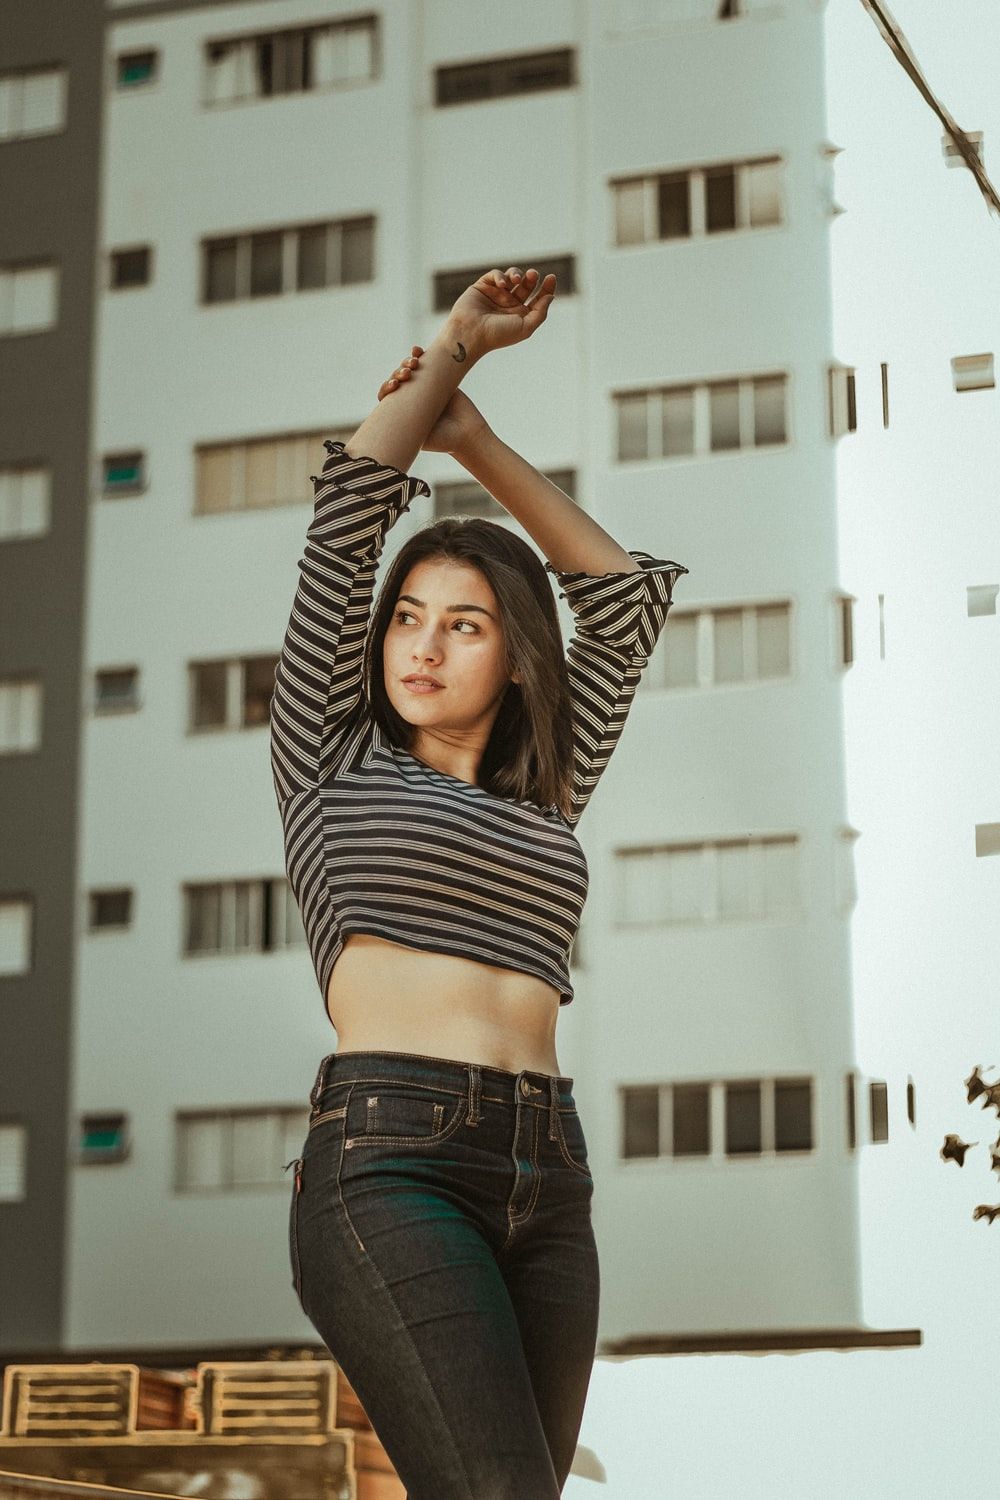 Crop Top Picture [HD]. Download Free Image